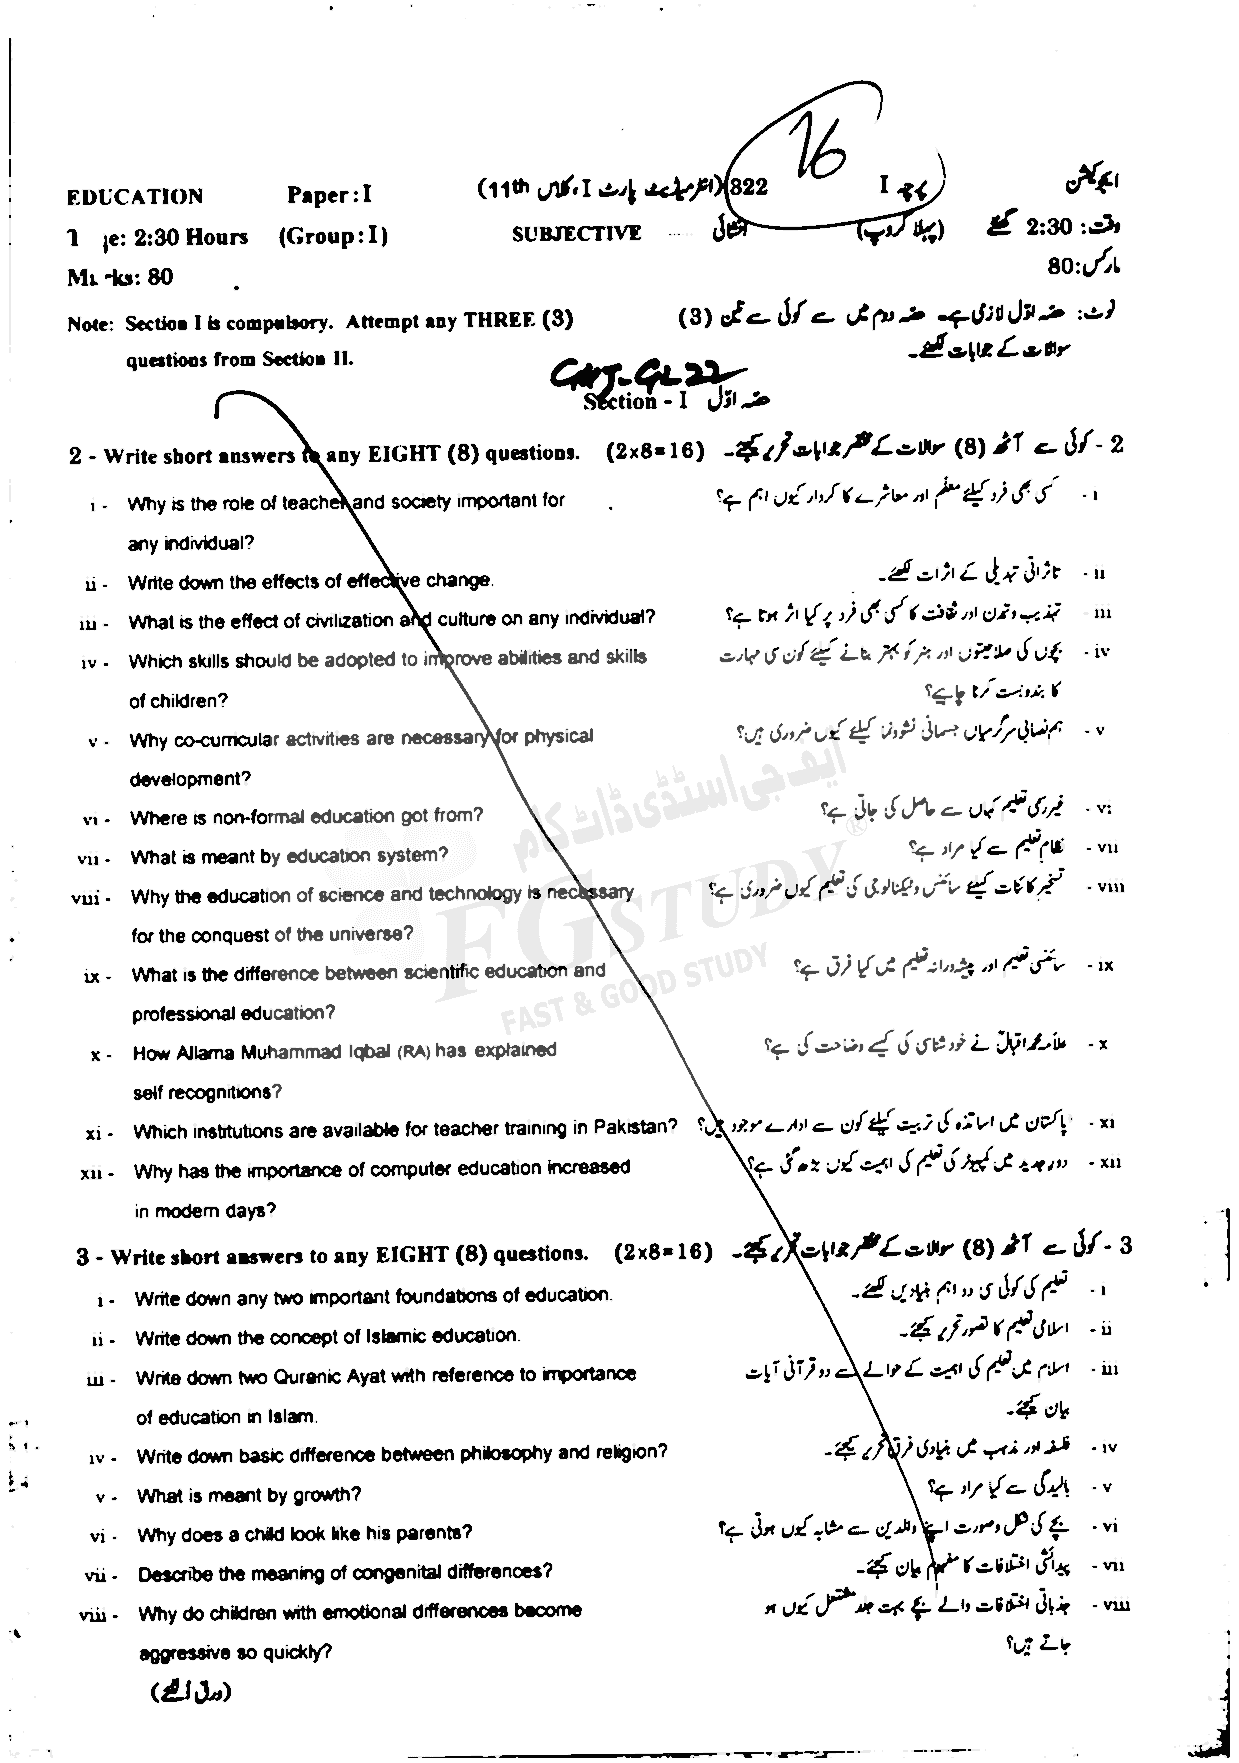 11th Class Education Past Paper 2022 Gujranwala Board Group 1 Subjective